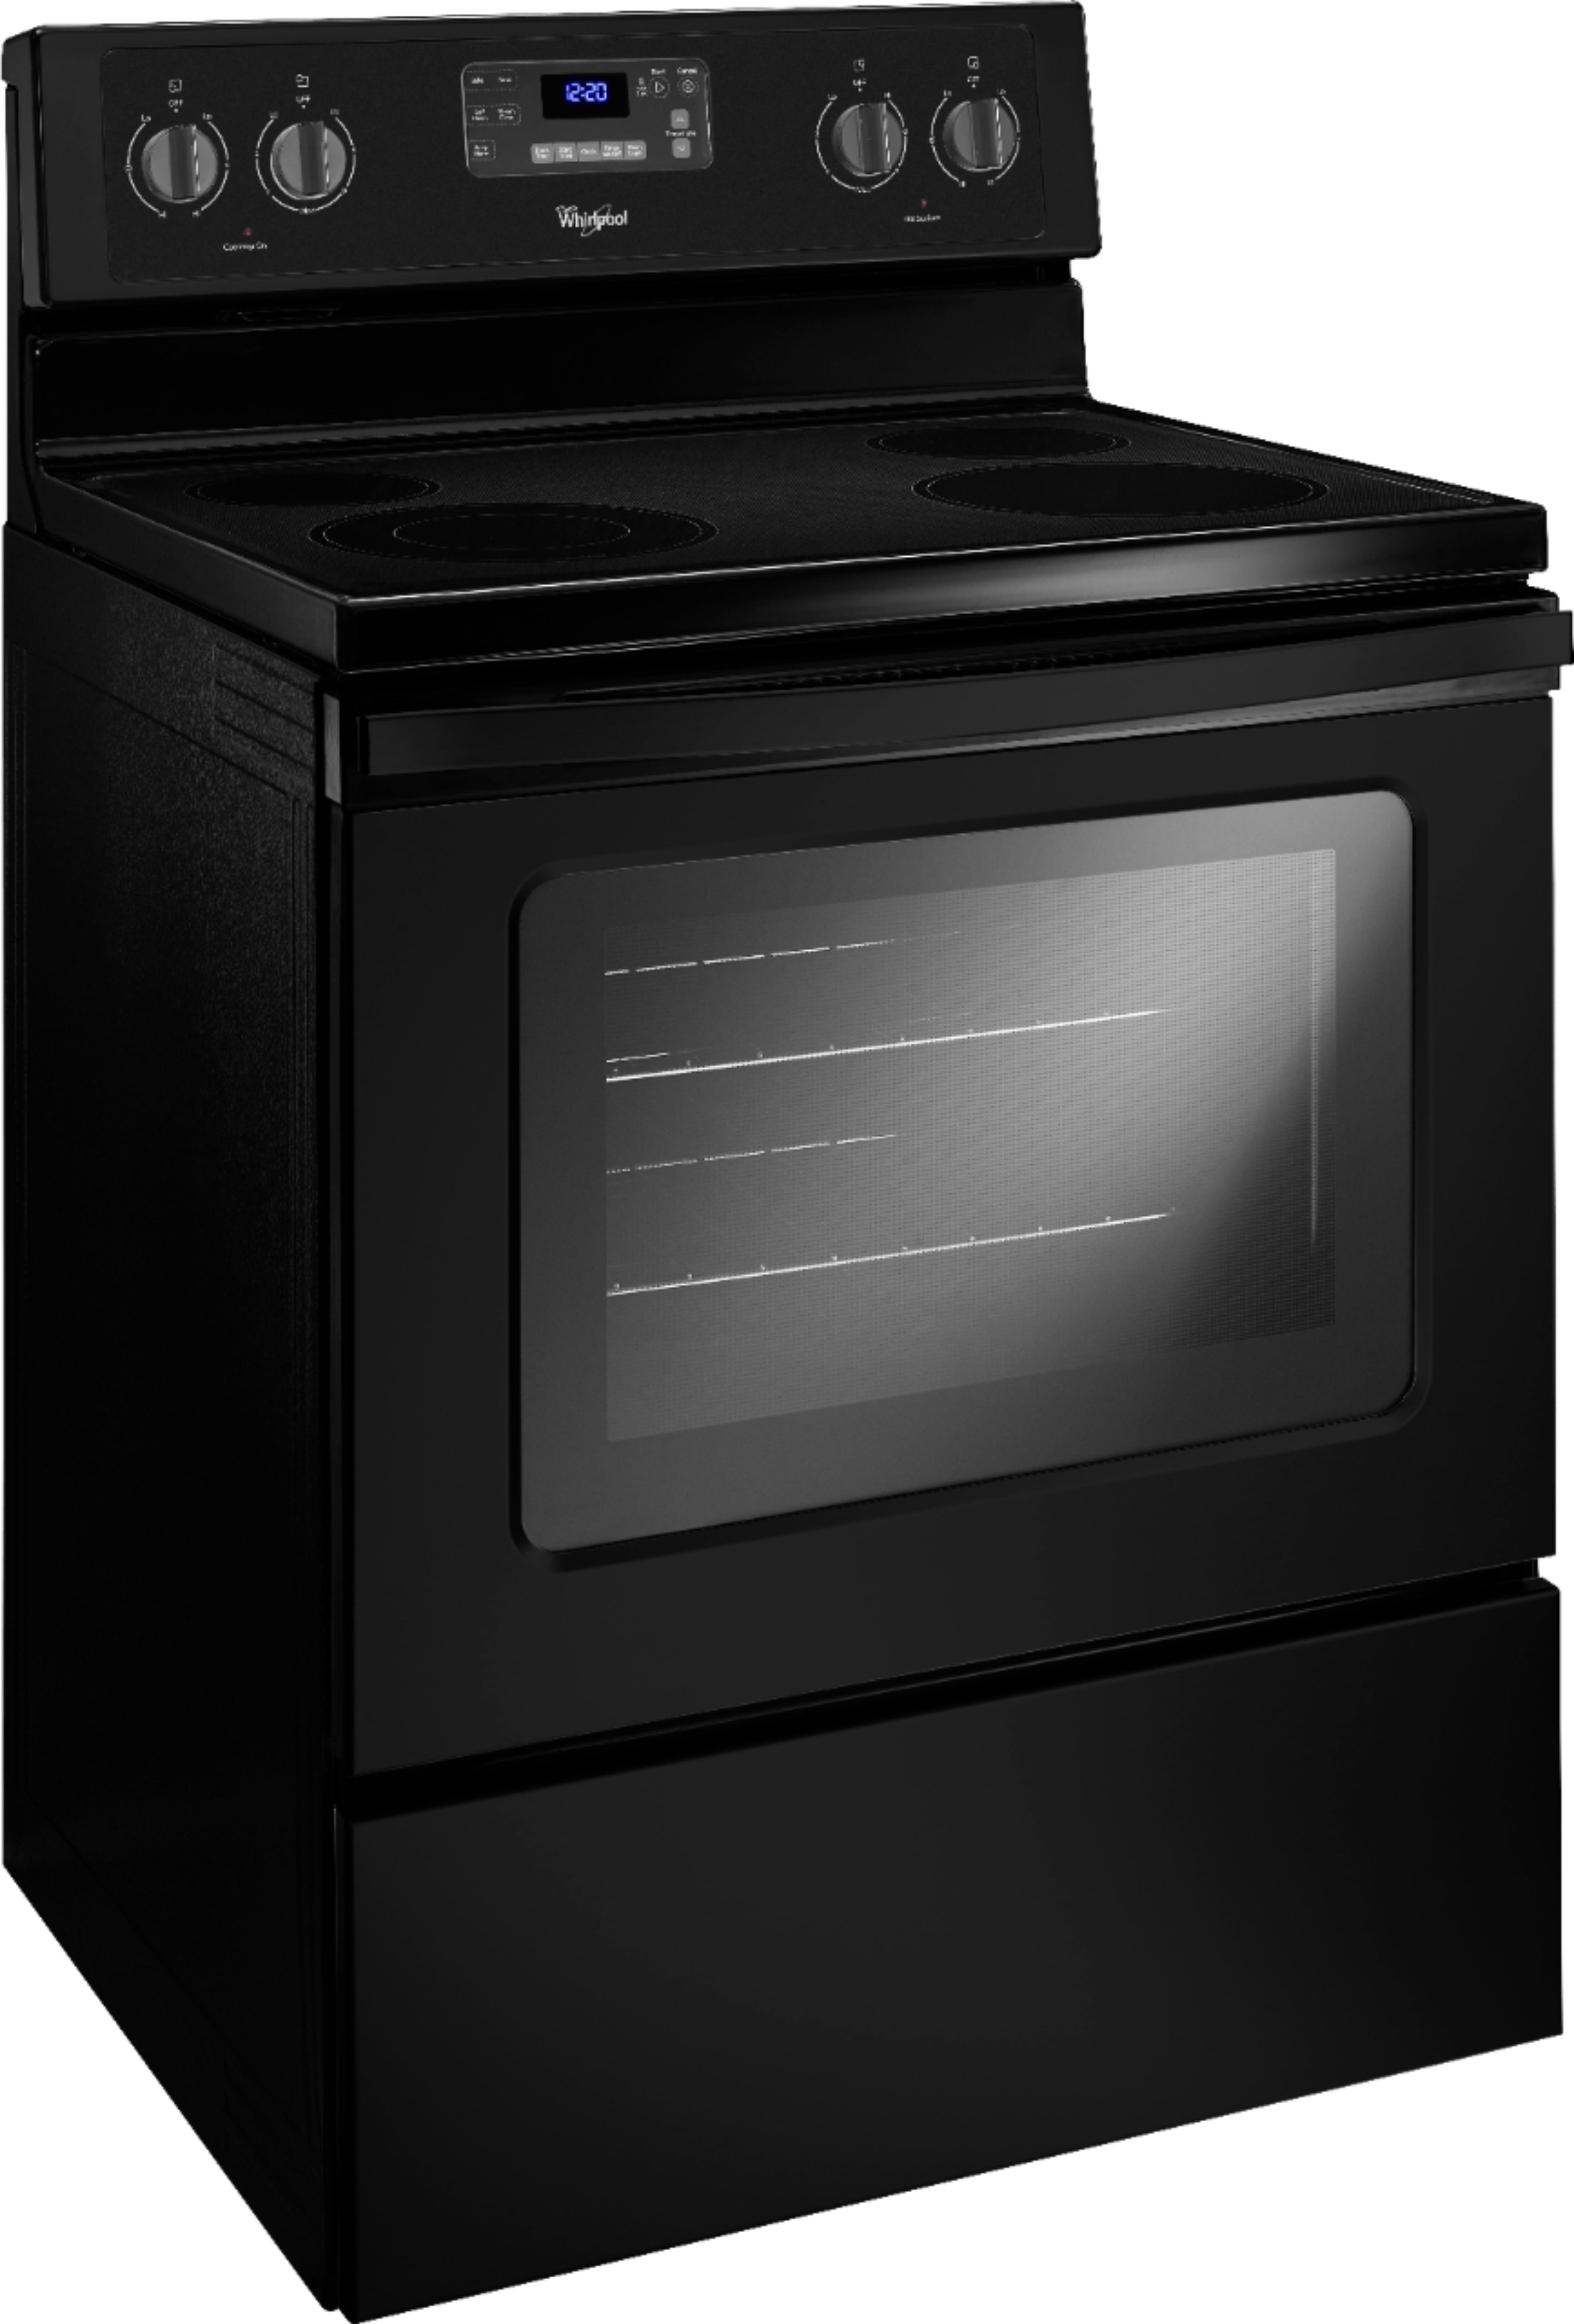 Best Buy: Whirlpool 5.3 Cu. Ft. Self-Cleaning Freestanding Electric ...